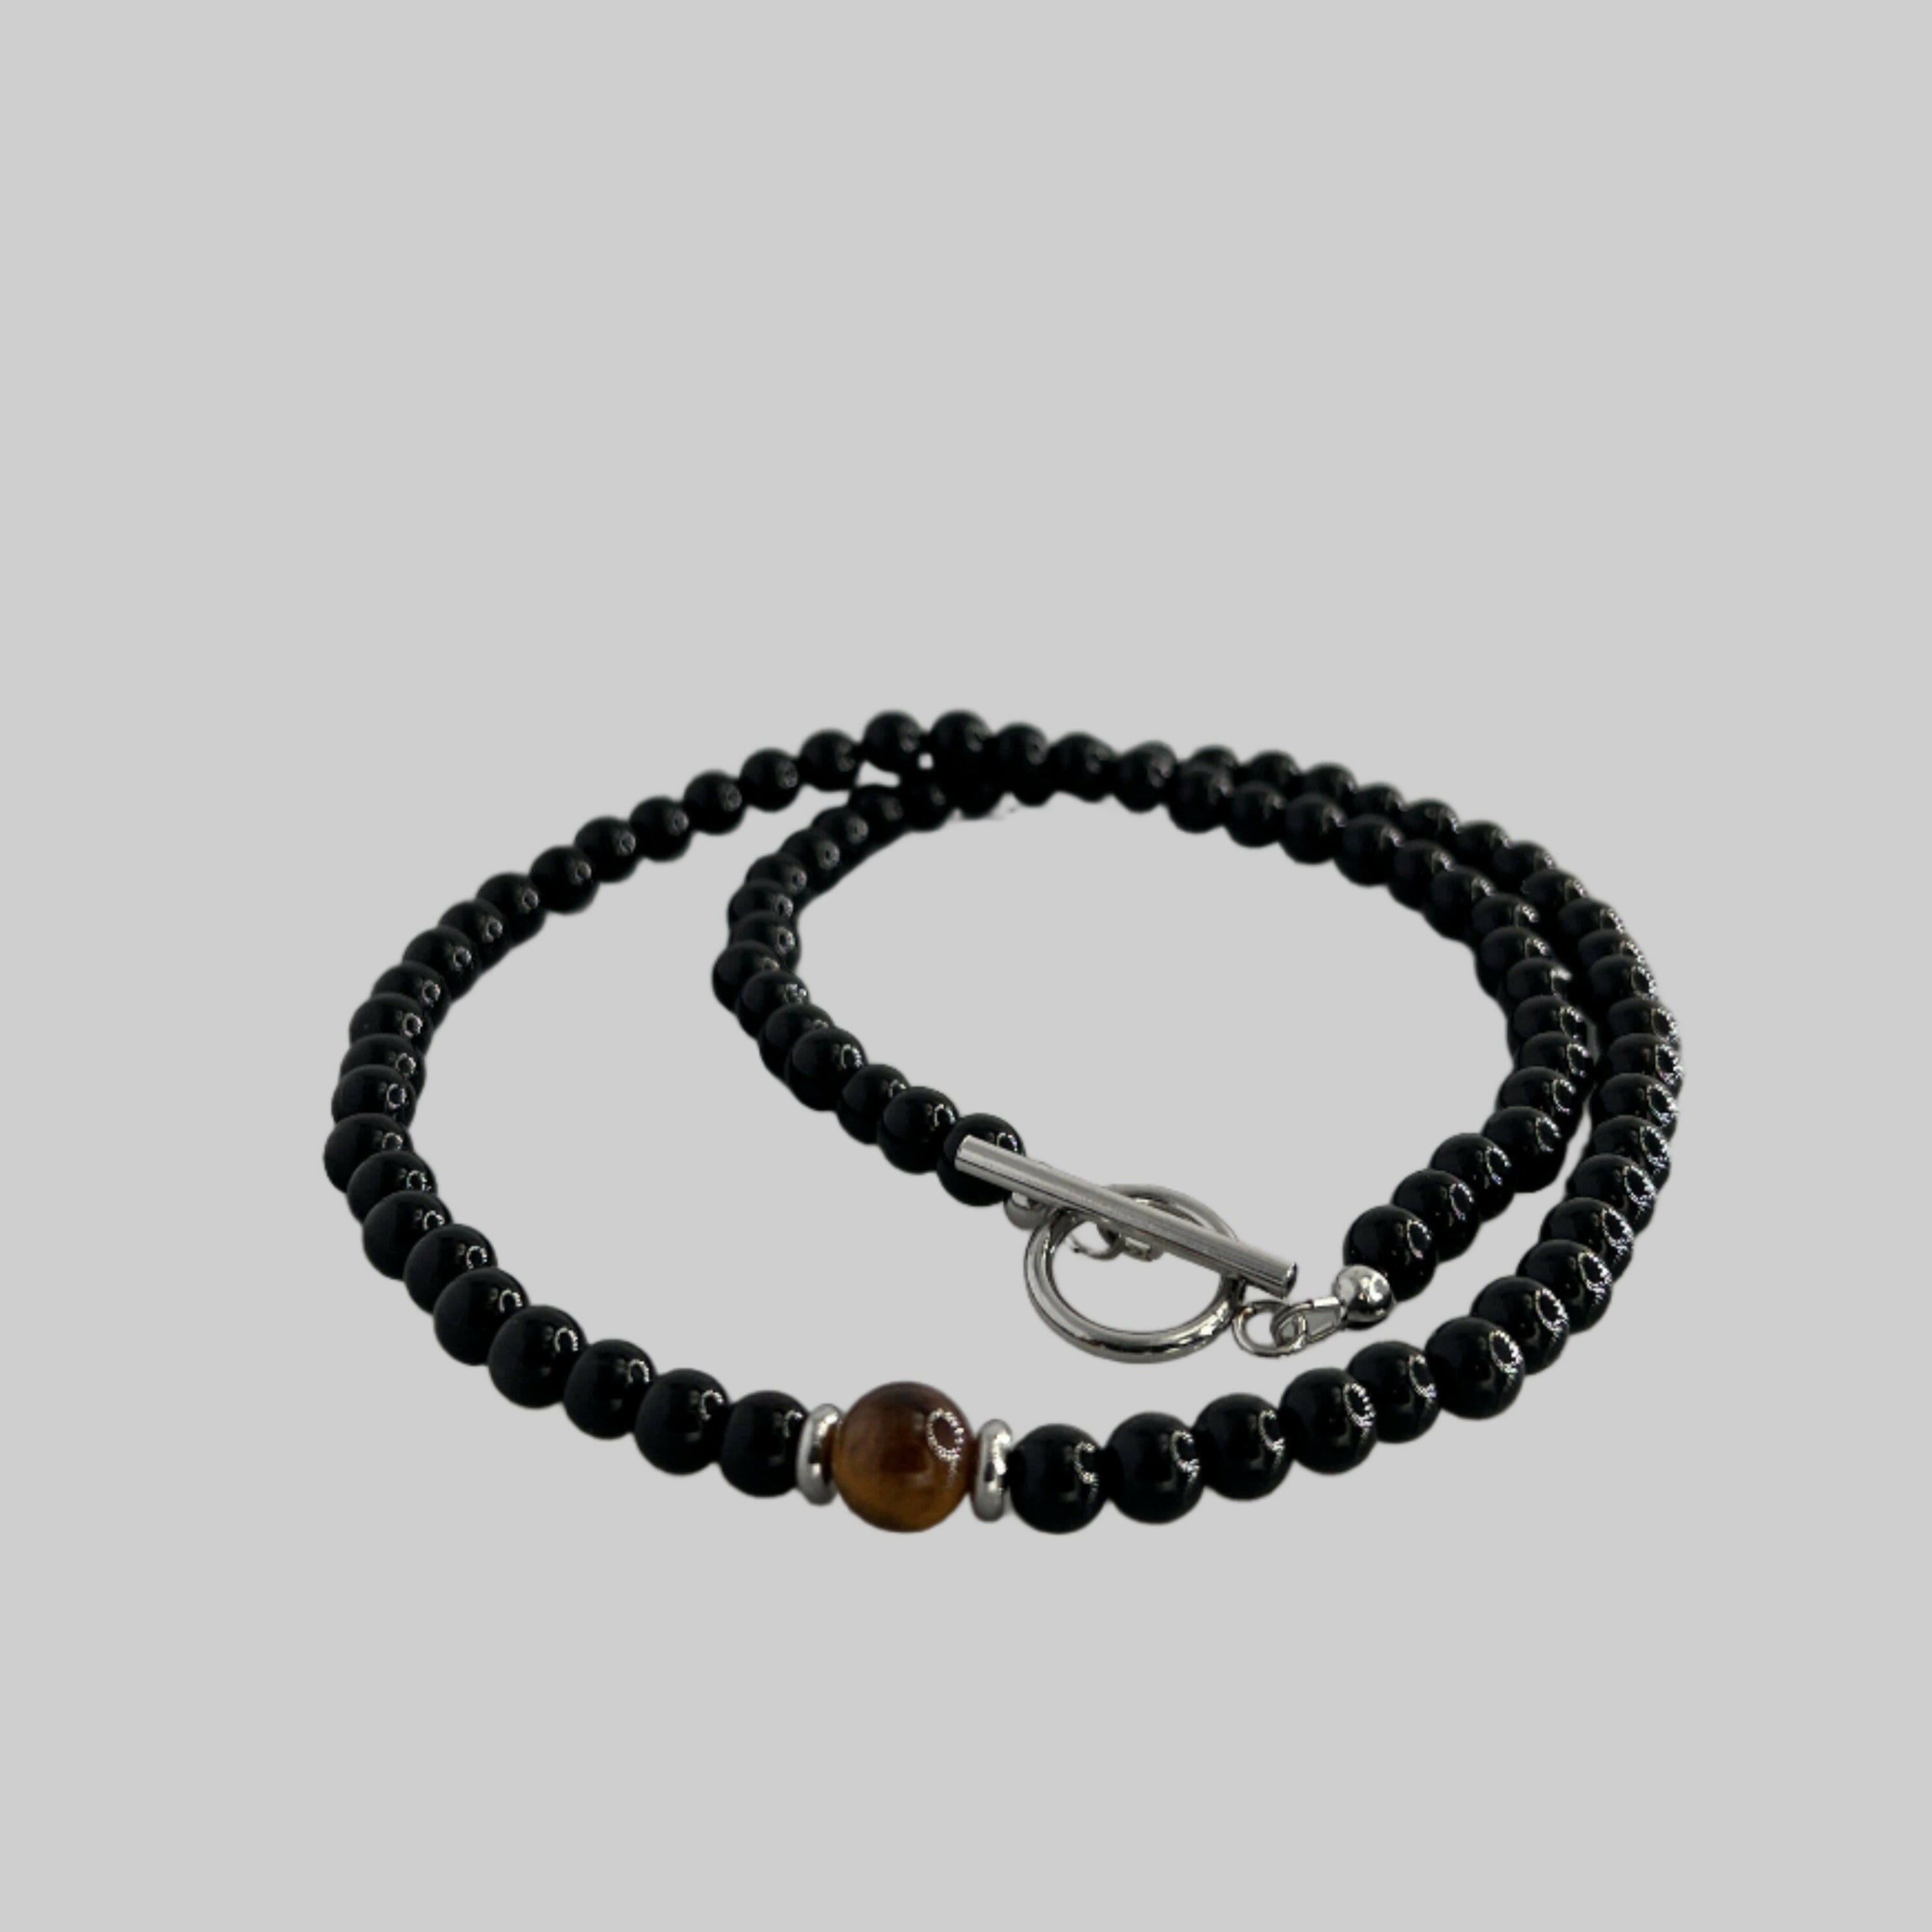 Bec Sue Jewelry Shop Necklaces Onyx Necklace, Onyx and Tiger Eye Necklace 6mm beads Tags